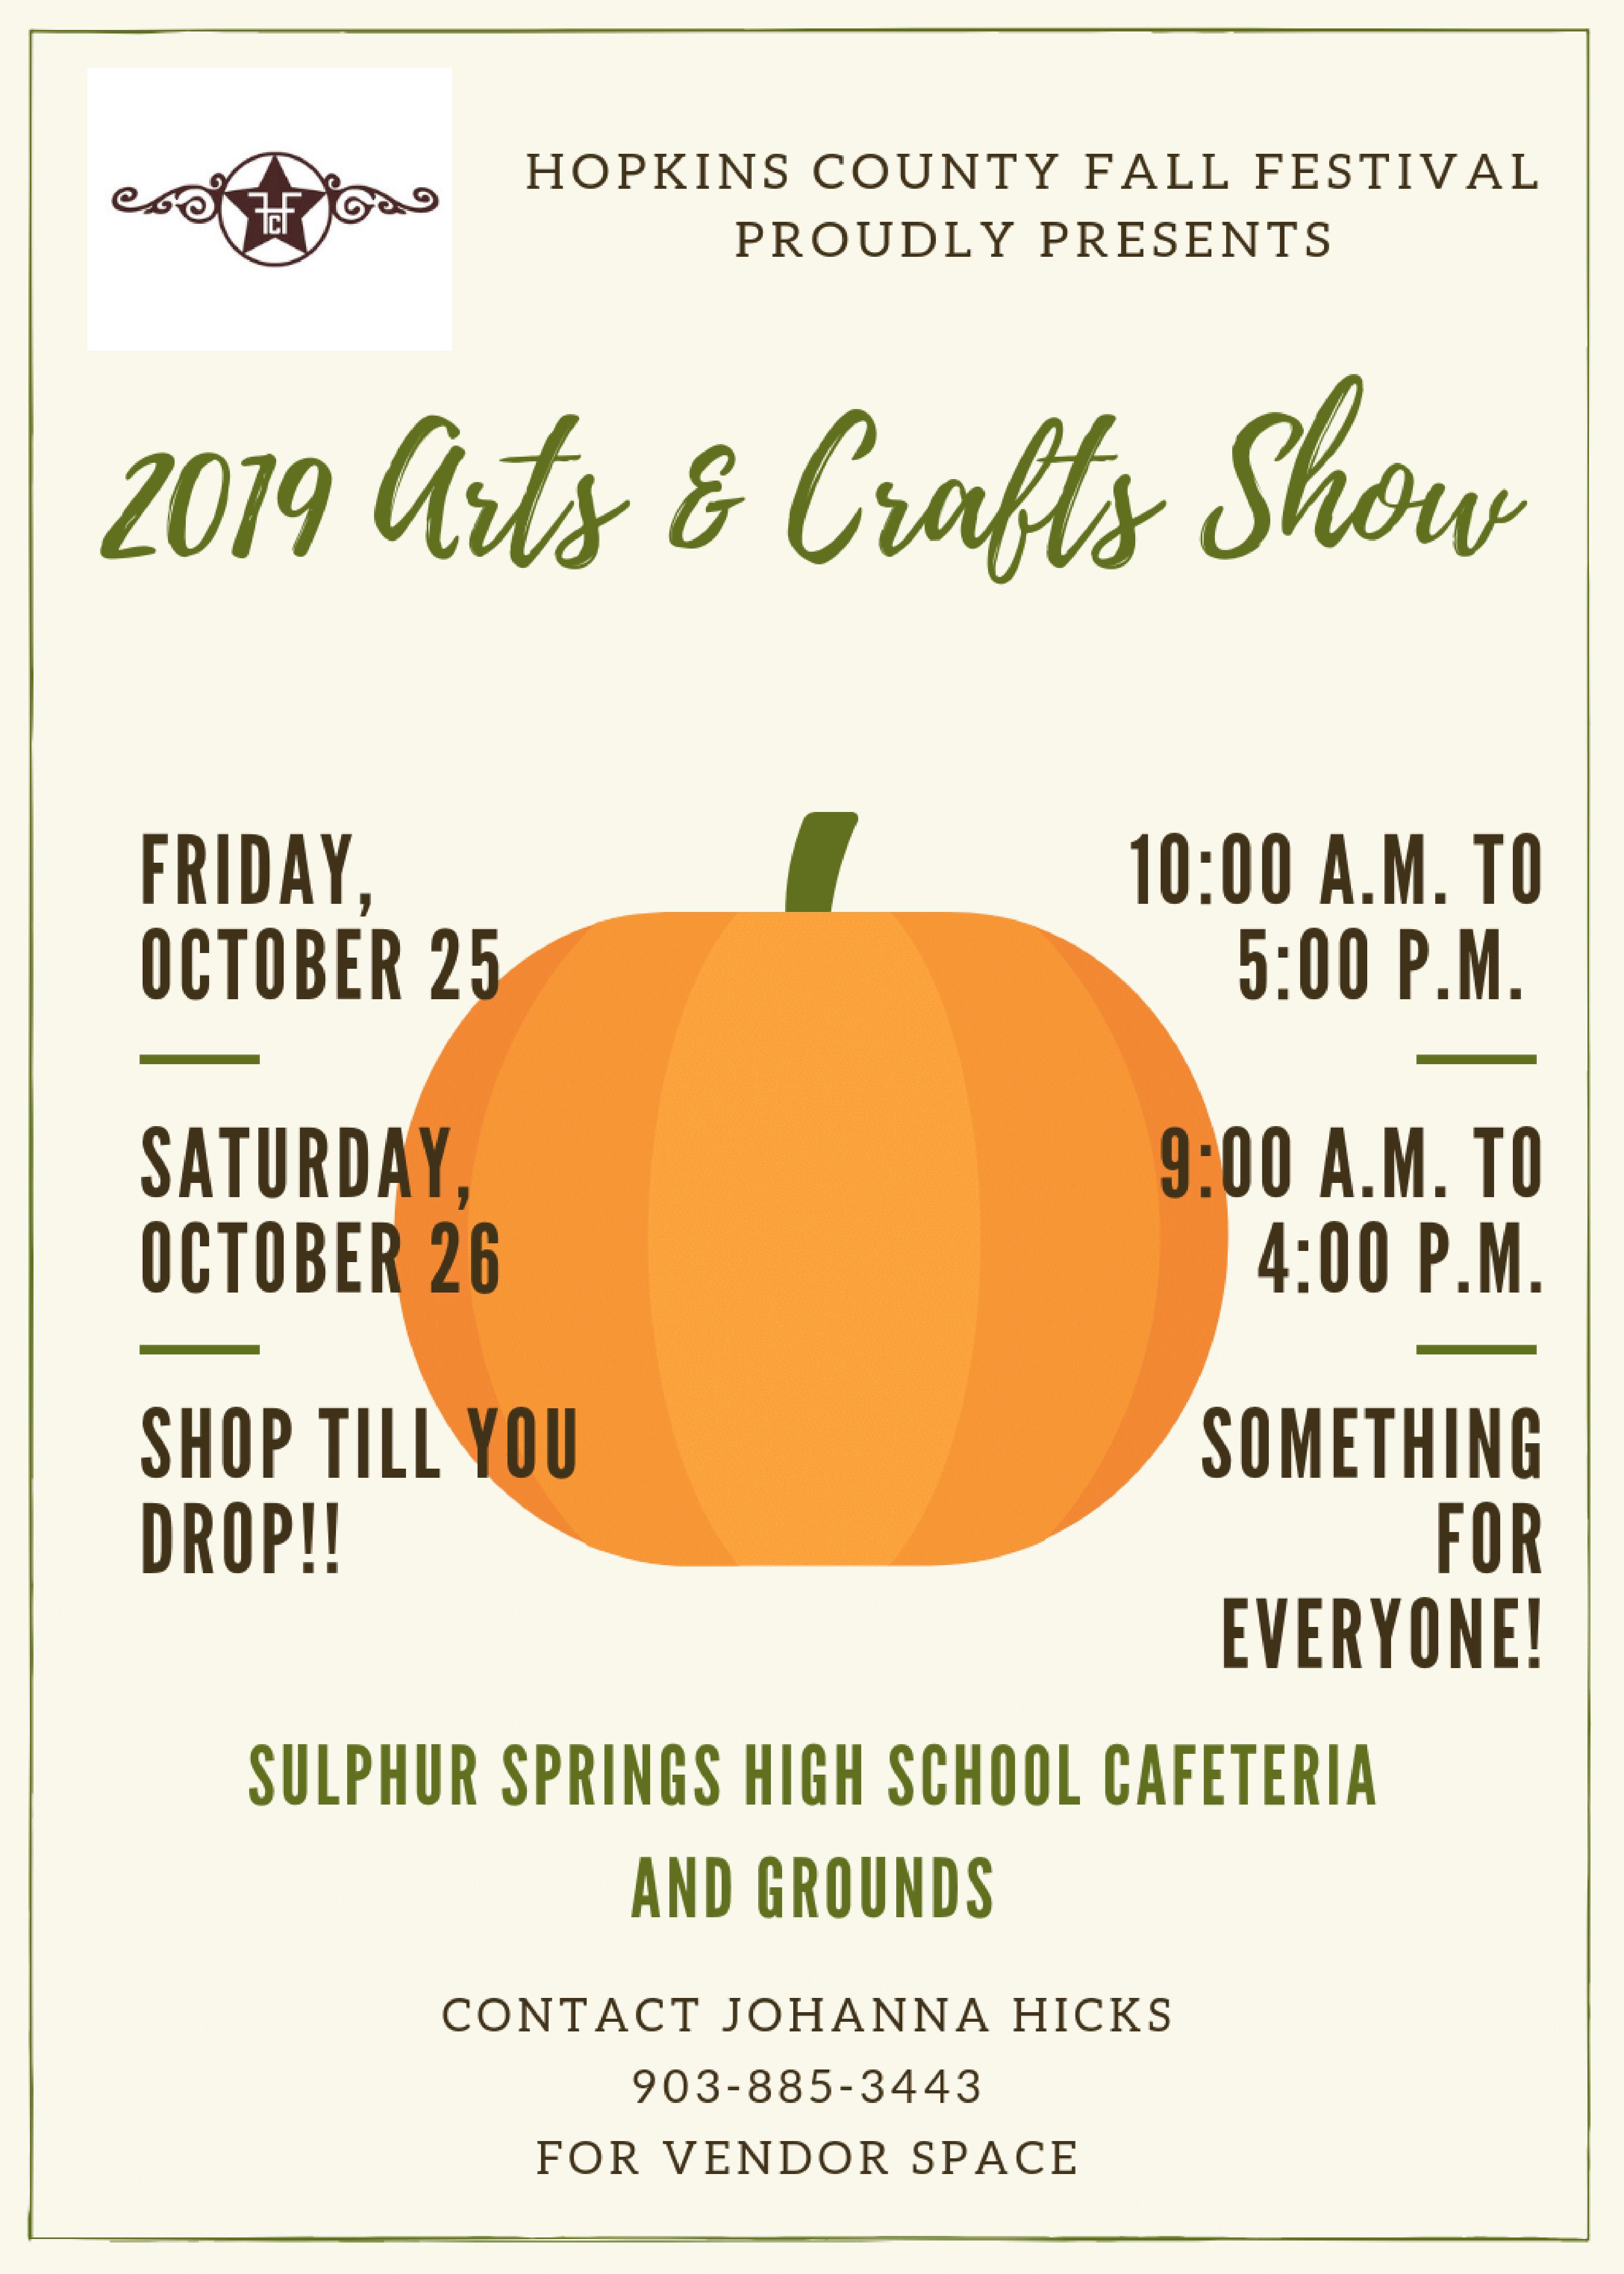 2019 Hopkins County Fall Festival Presented by SS Dodge’s Arts & Crafts Show Sponsored by Circle E and M&F Western Wear Set for October 25th and 26th at SSHS Cafeteria